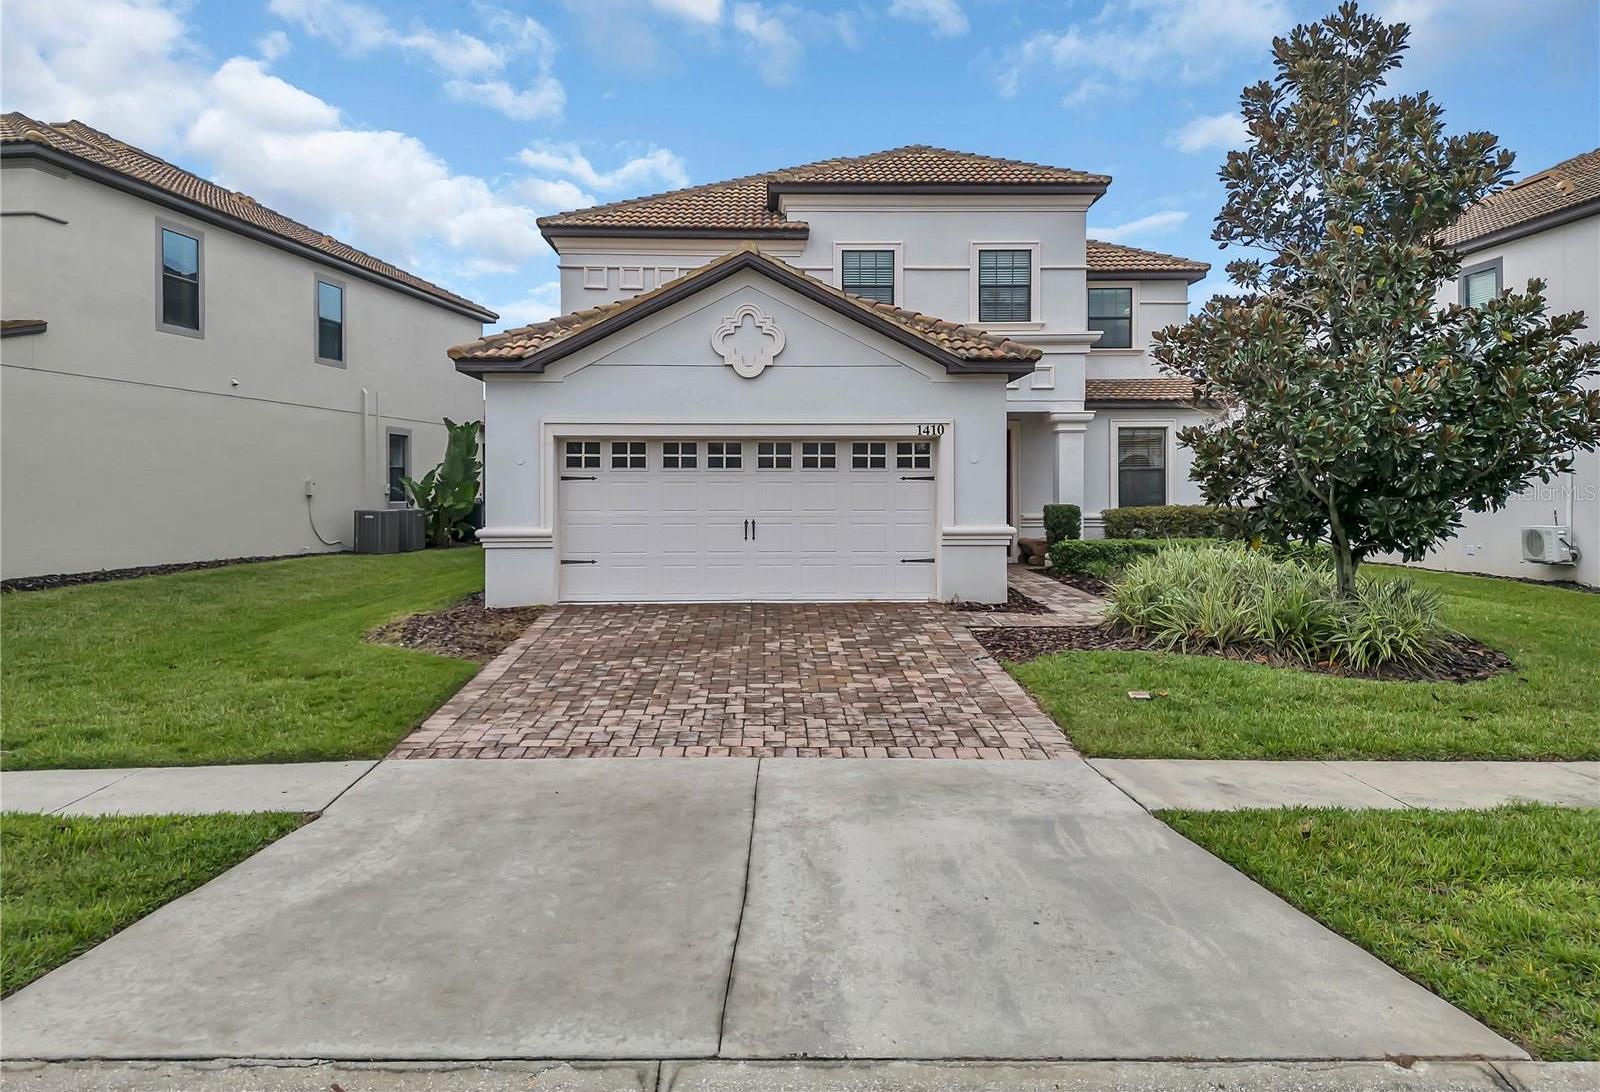 Photo one of 1410 Moon Valley Dr Davenport FL 33896 | MLS O6191806